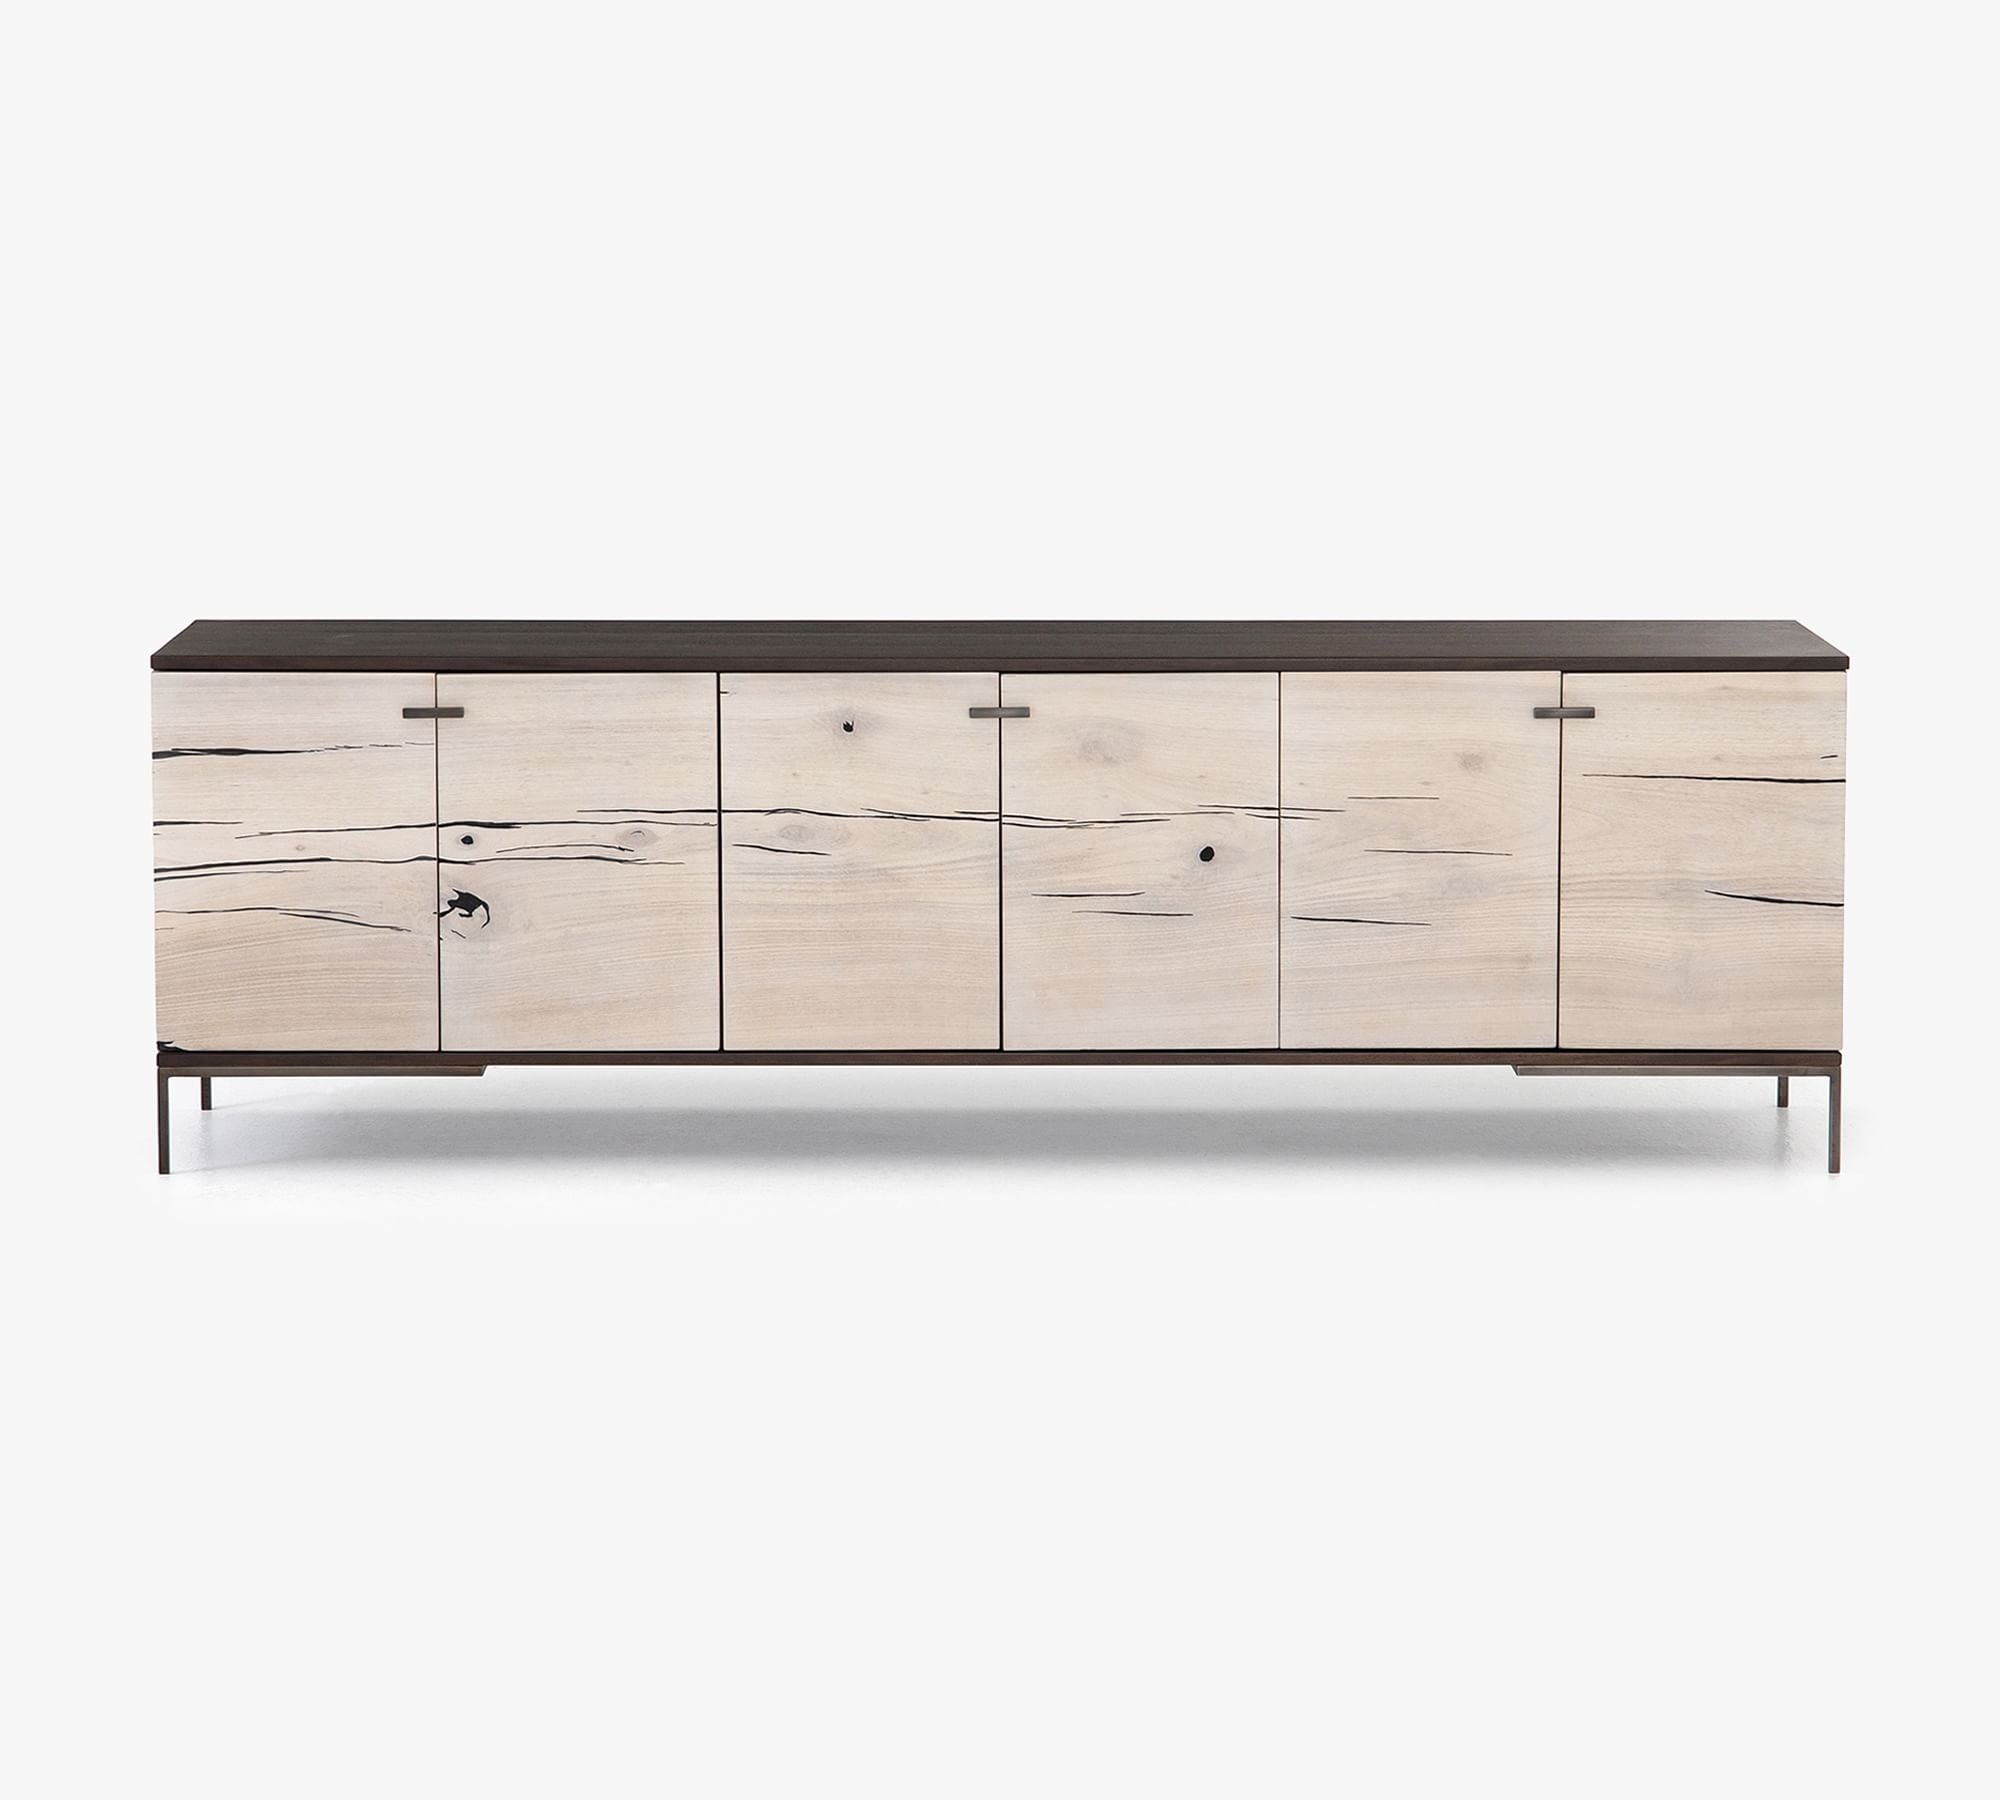 Berlin 78" Reclaimed Wood Media Console, Bleached/Black - Image 0